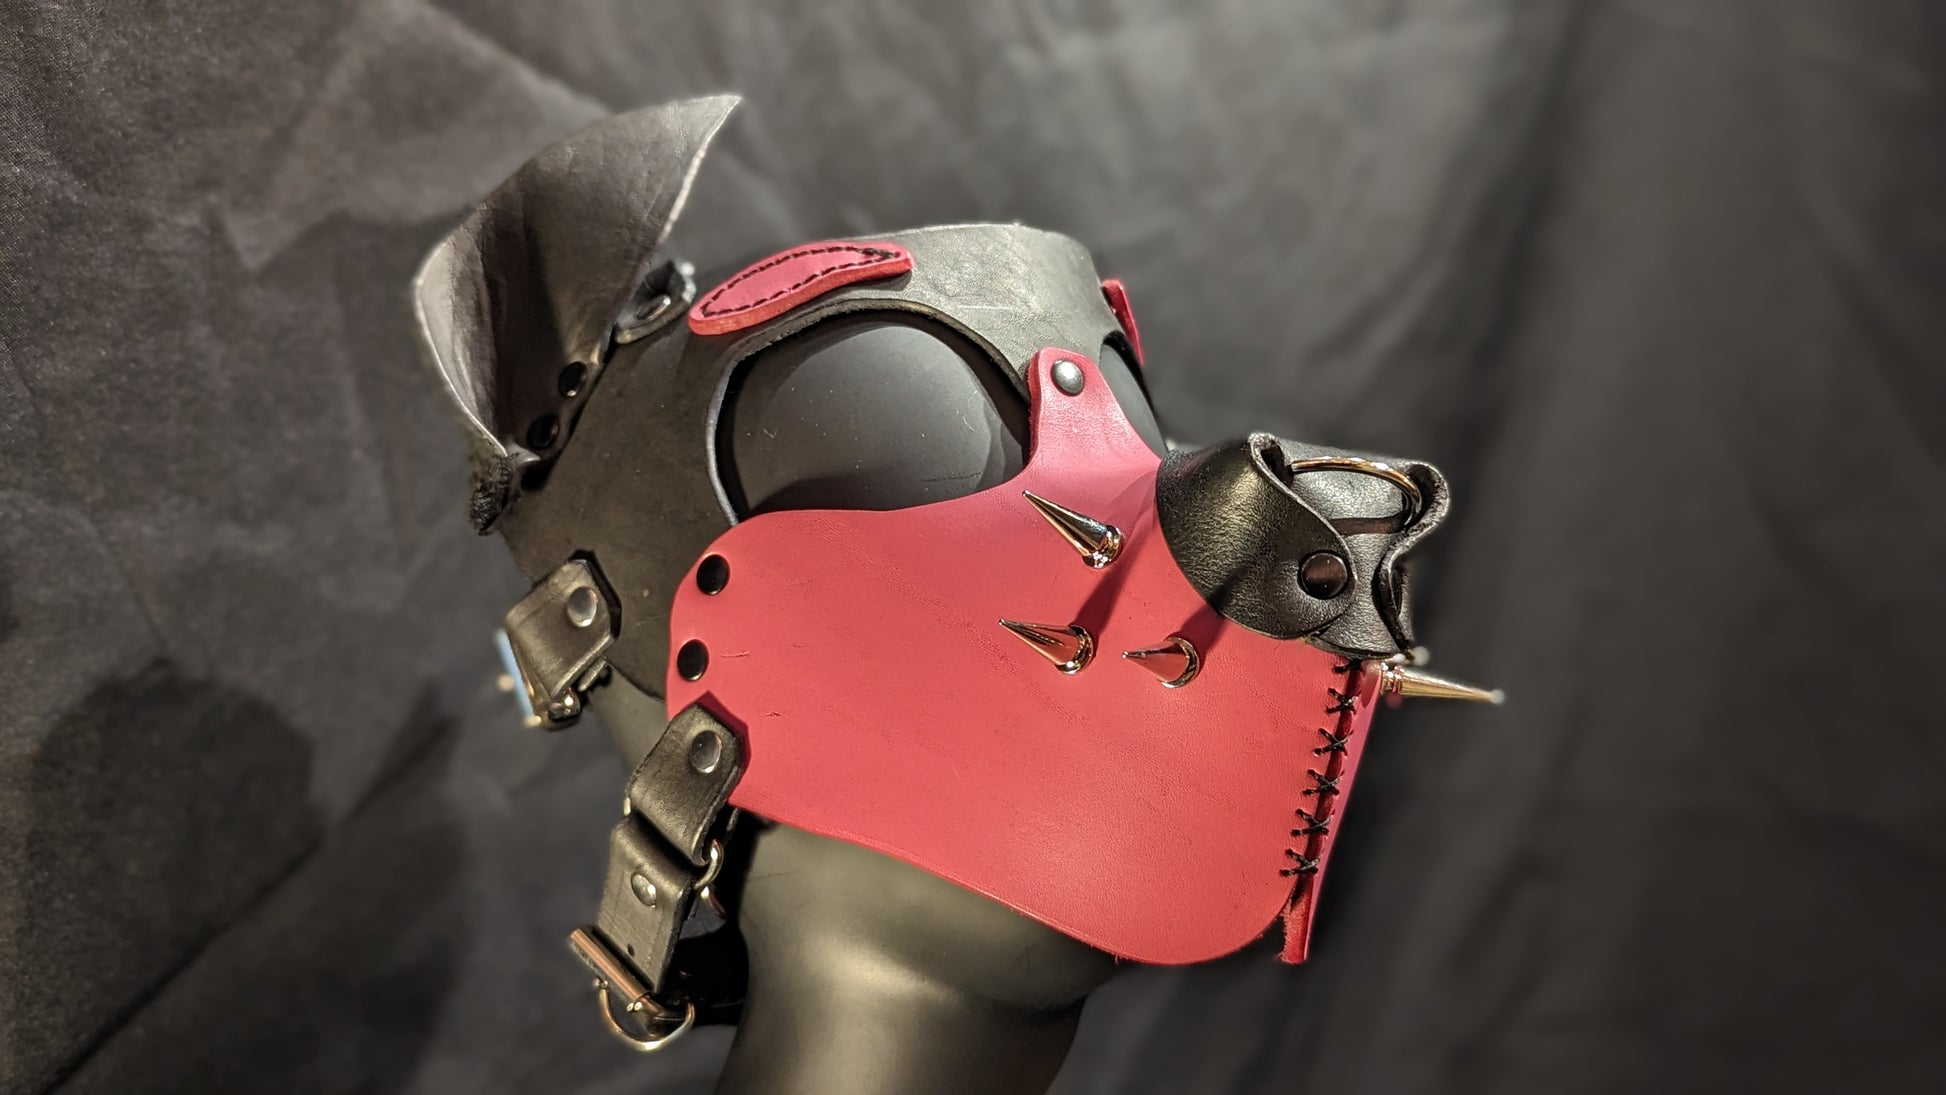 Handmade puphood with a black base color and bright bubblegum pink muzzle and eyebrow and 1 inch silver treecone spike whiskers.. You can see the right side of the hood in this image.